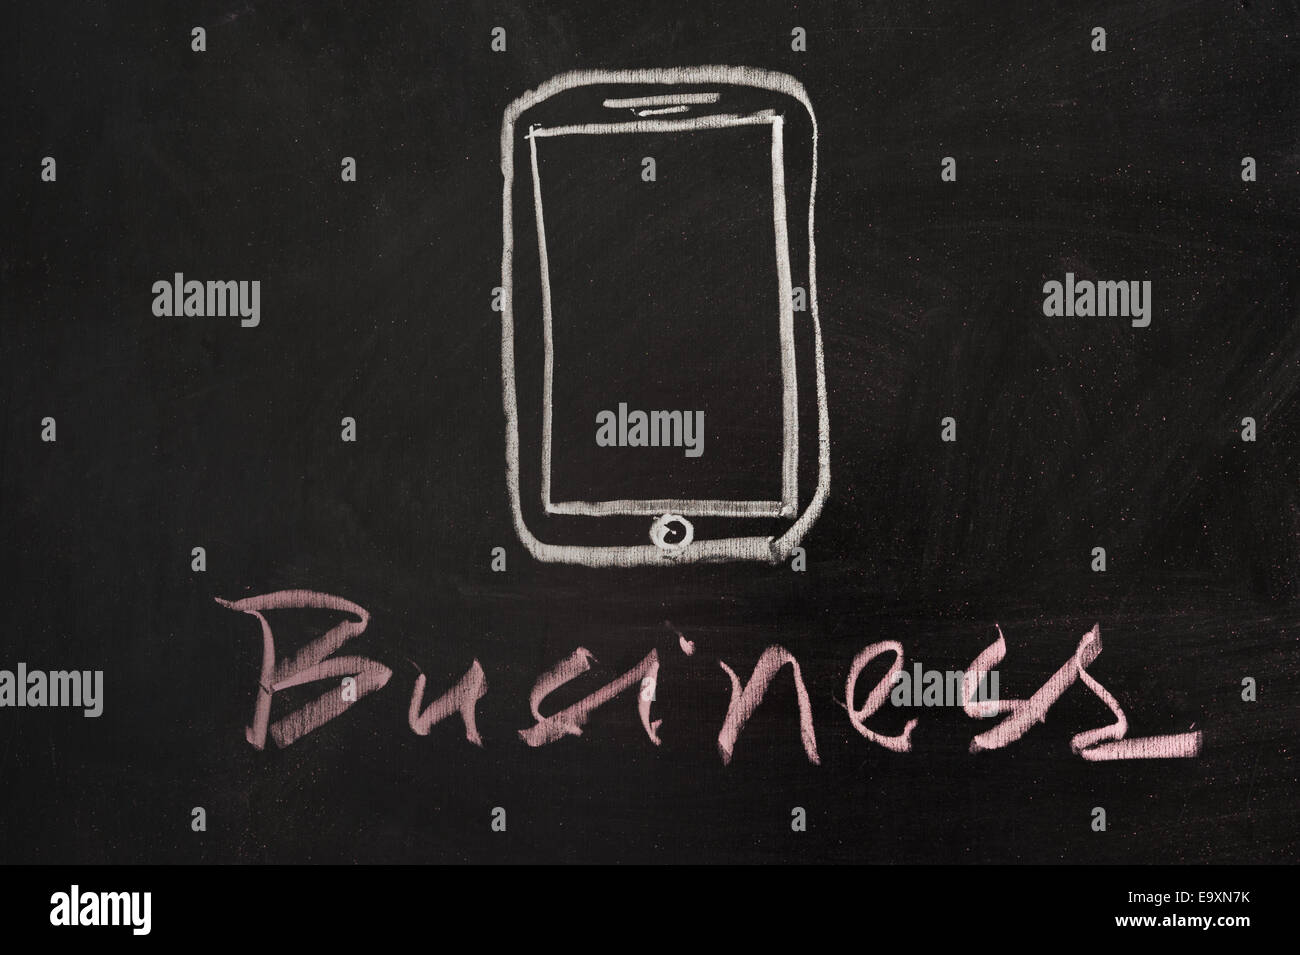 Mobile business concept drawn on blackboard Stock Photo